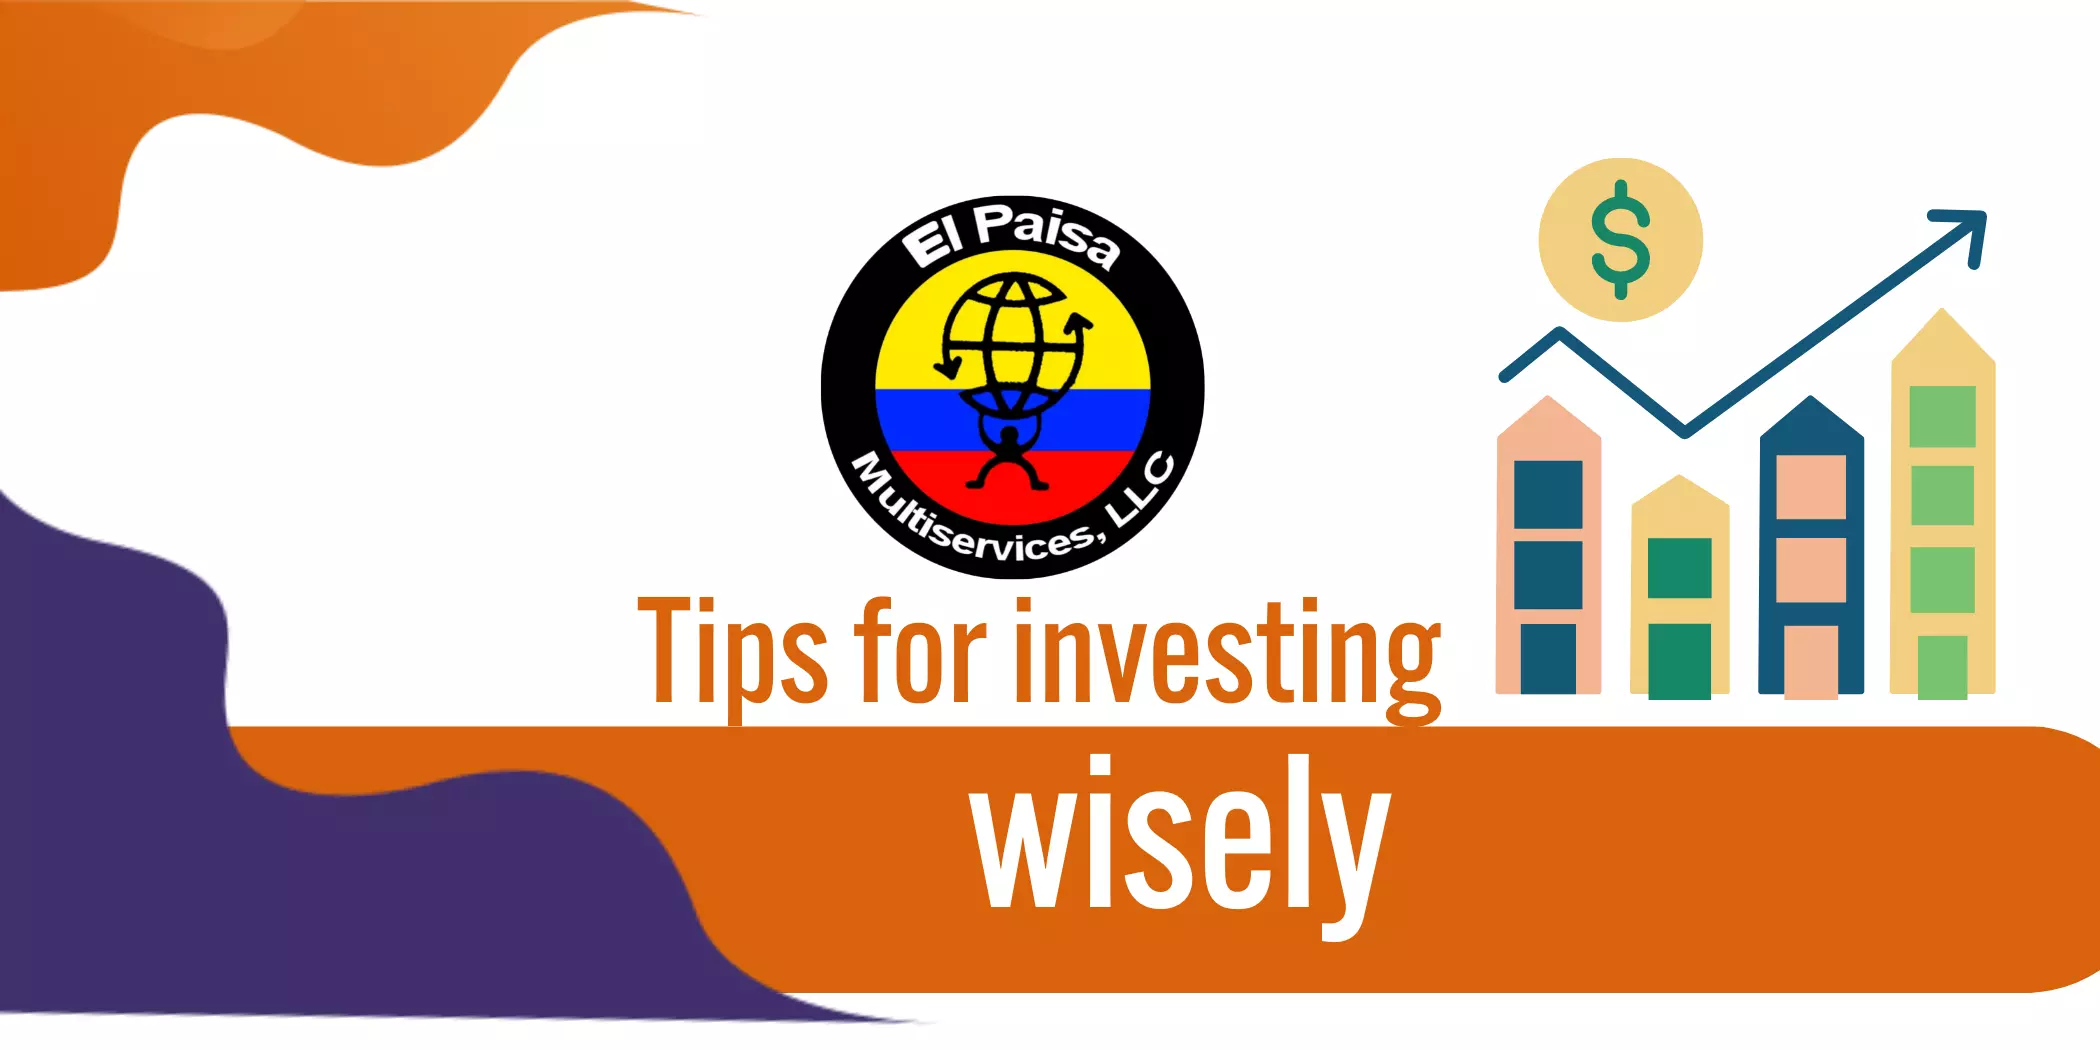 Tips for investing wisely